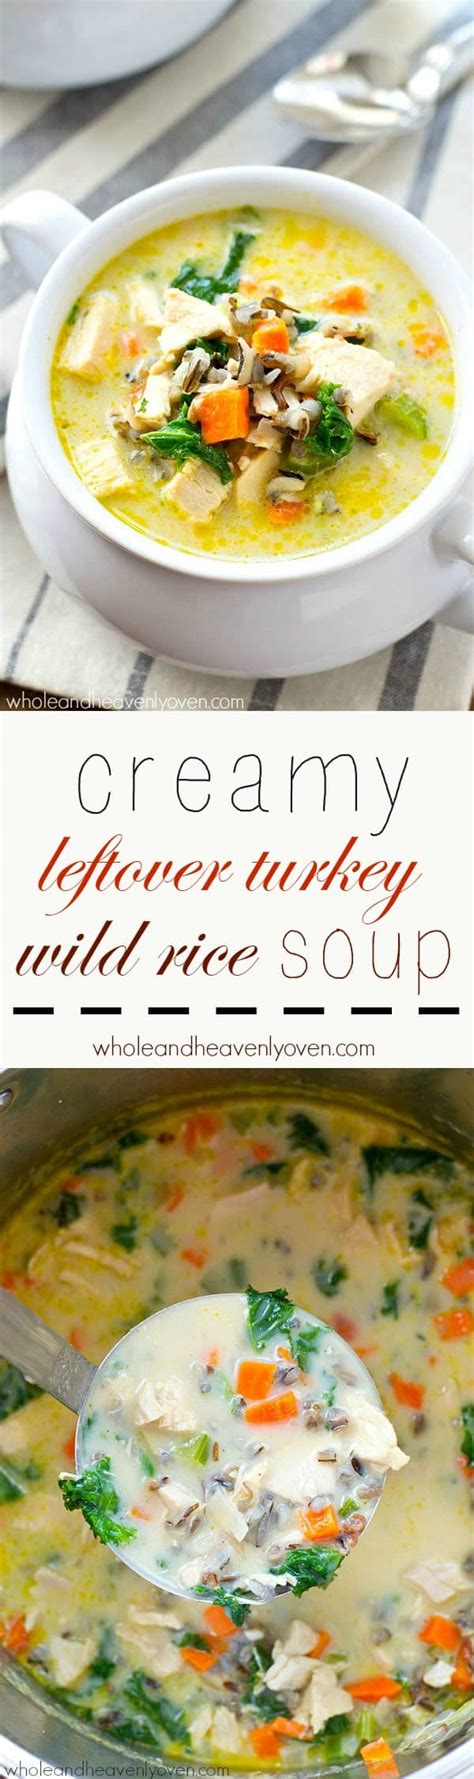 Sour cream contributes tangy flavor and a softer texture, and there are a ton of corn kernels to ensure you get several in each bite. Creamy Leftover Turkey Wild Rice Soup - Whole and Heavenly ...